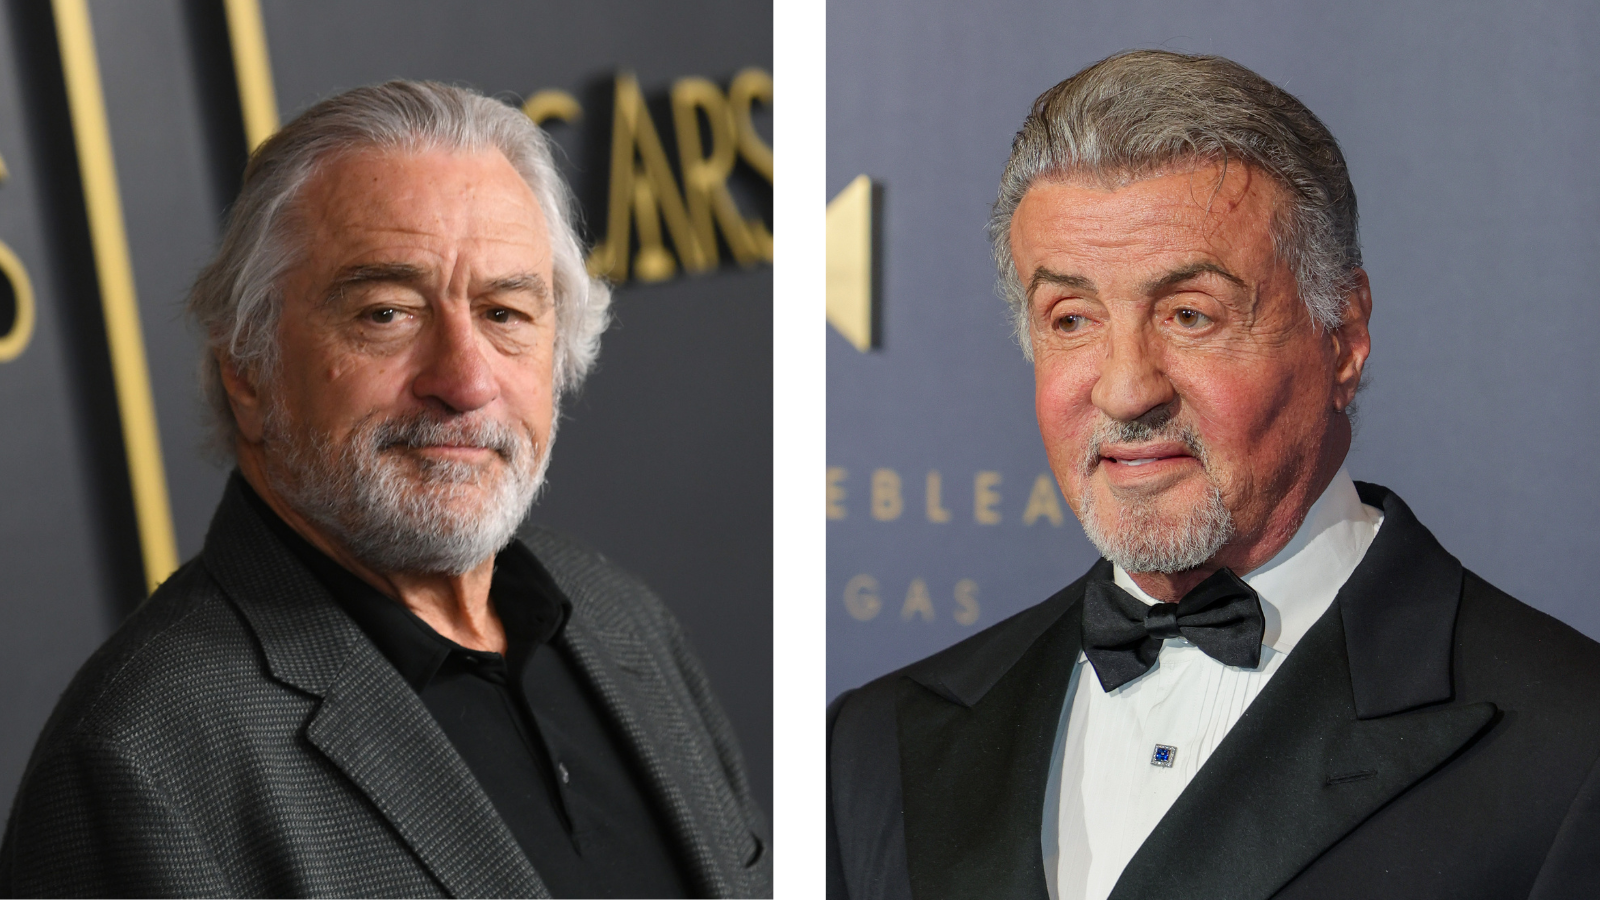 Sylvester Stallone Turned Down Work with Robert De Niro Over His 'Wokeness'?